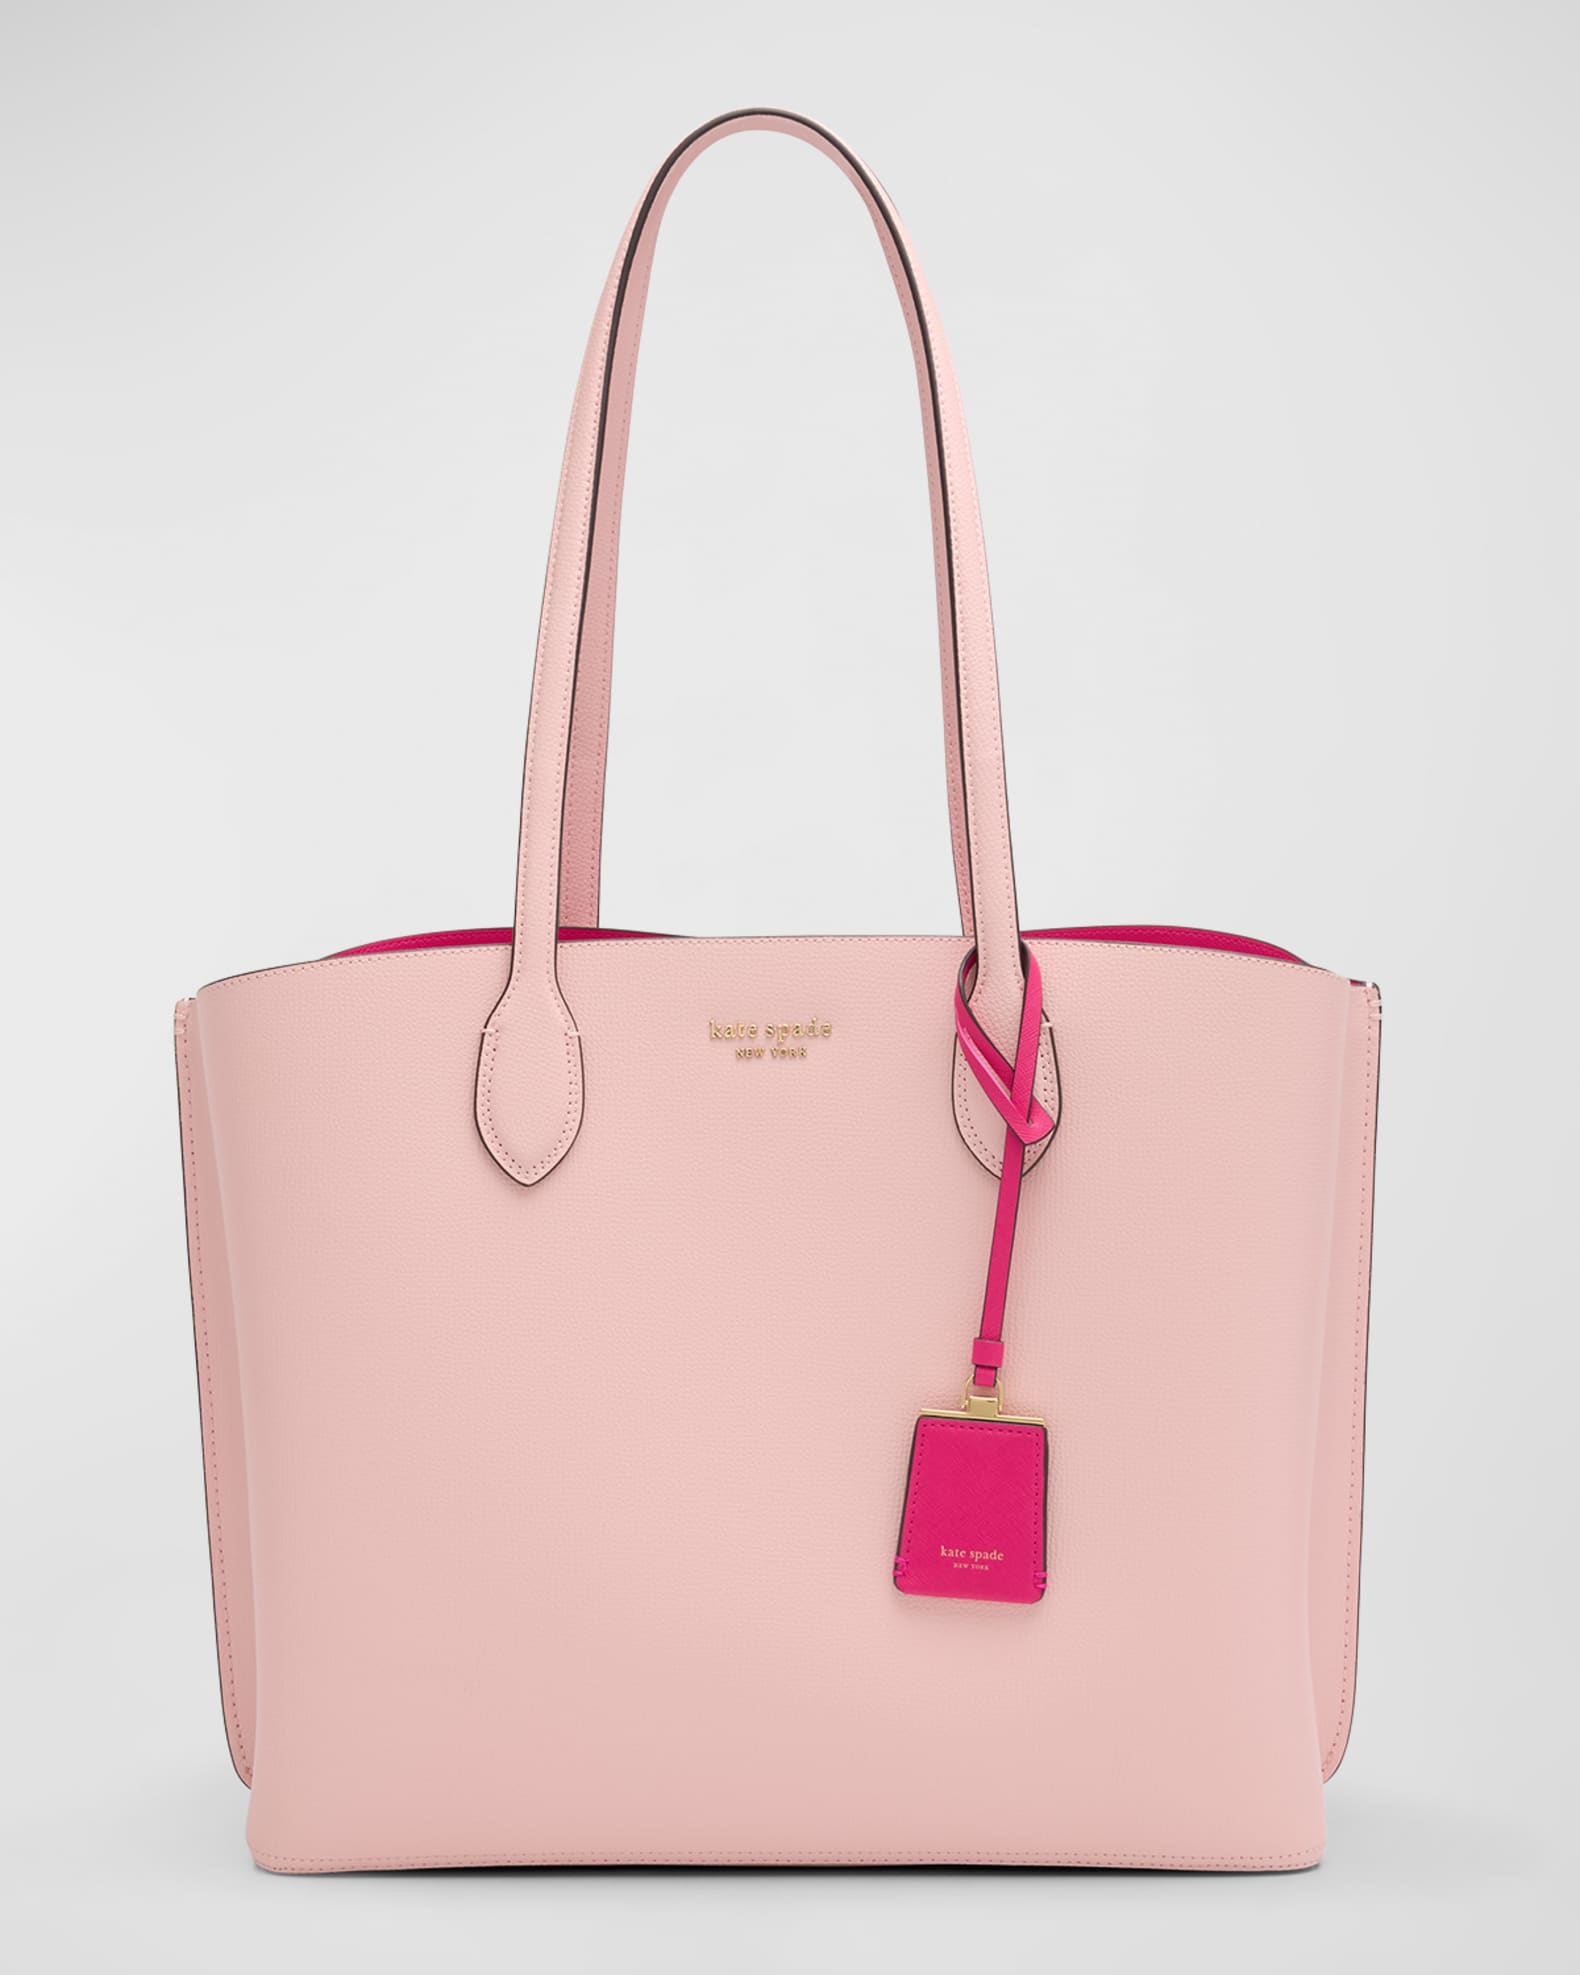 kate spade new york suite work leather tote bag | Neiman Marcus